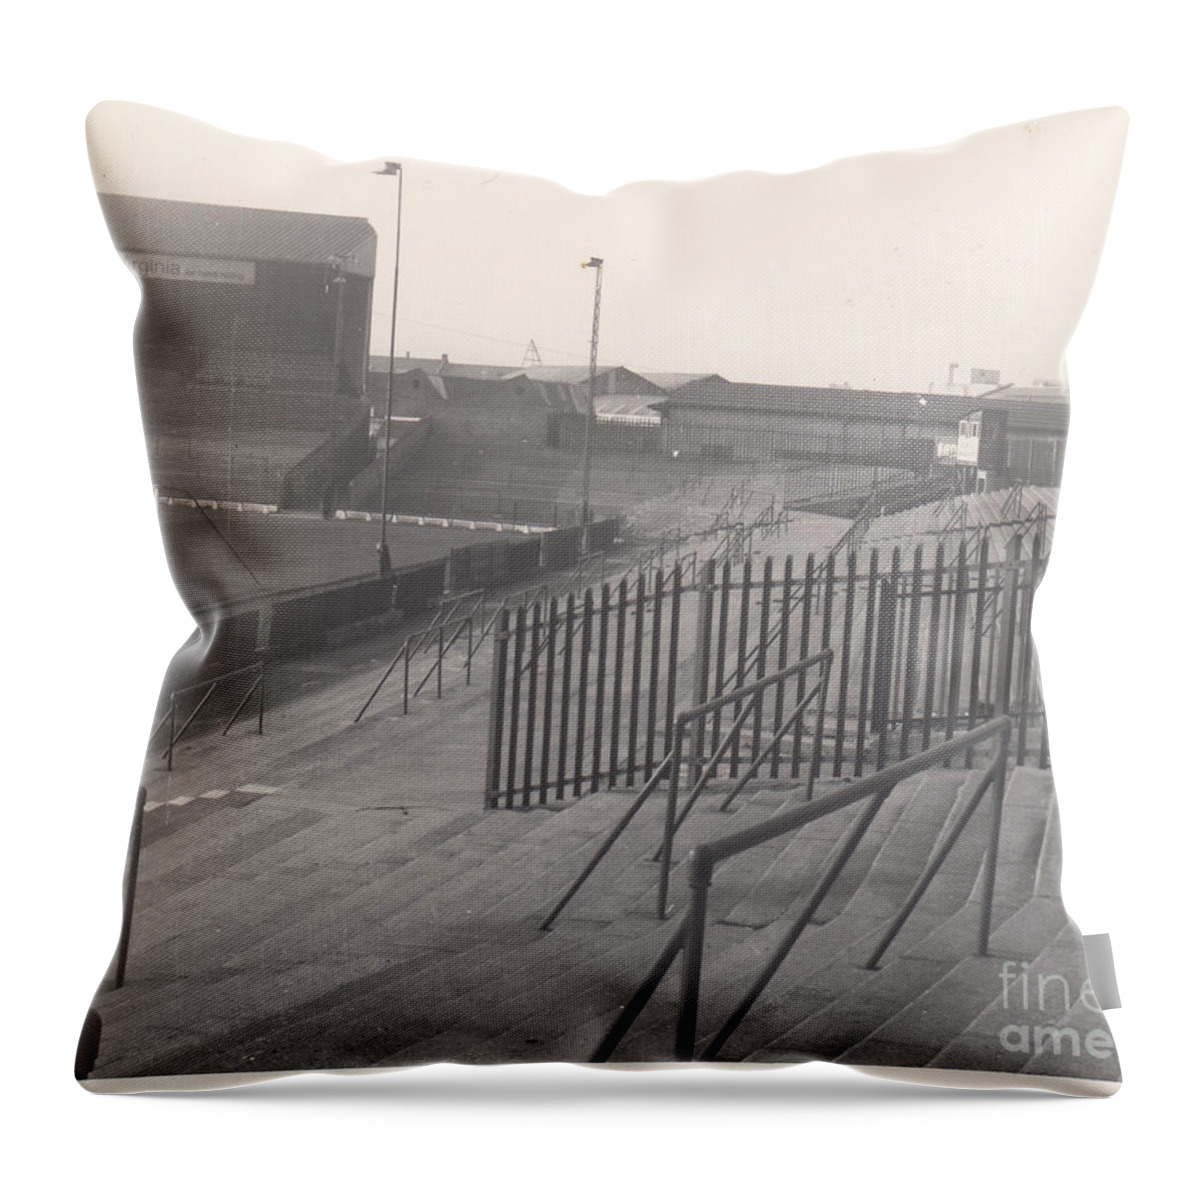  Throw Pillow featuring the photograph Bristol City - Ashton Gate - West End Stand 1 - October 1964 by Legendary Football Grounds